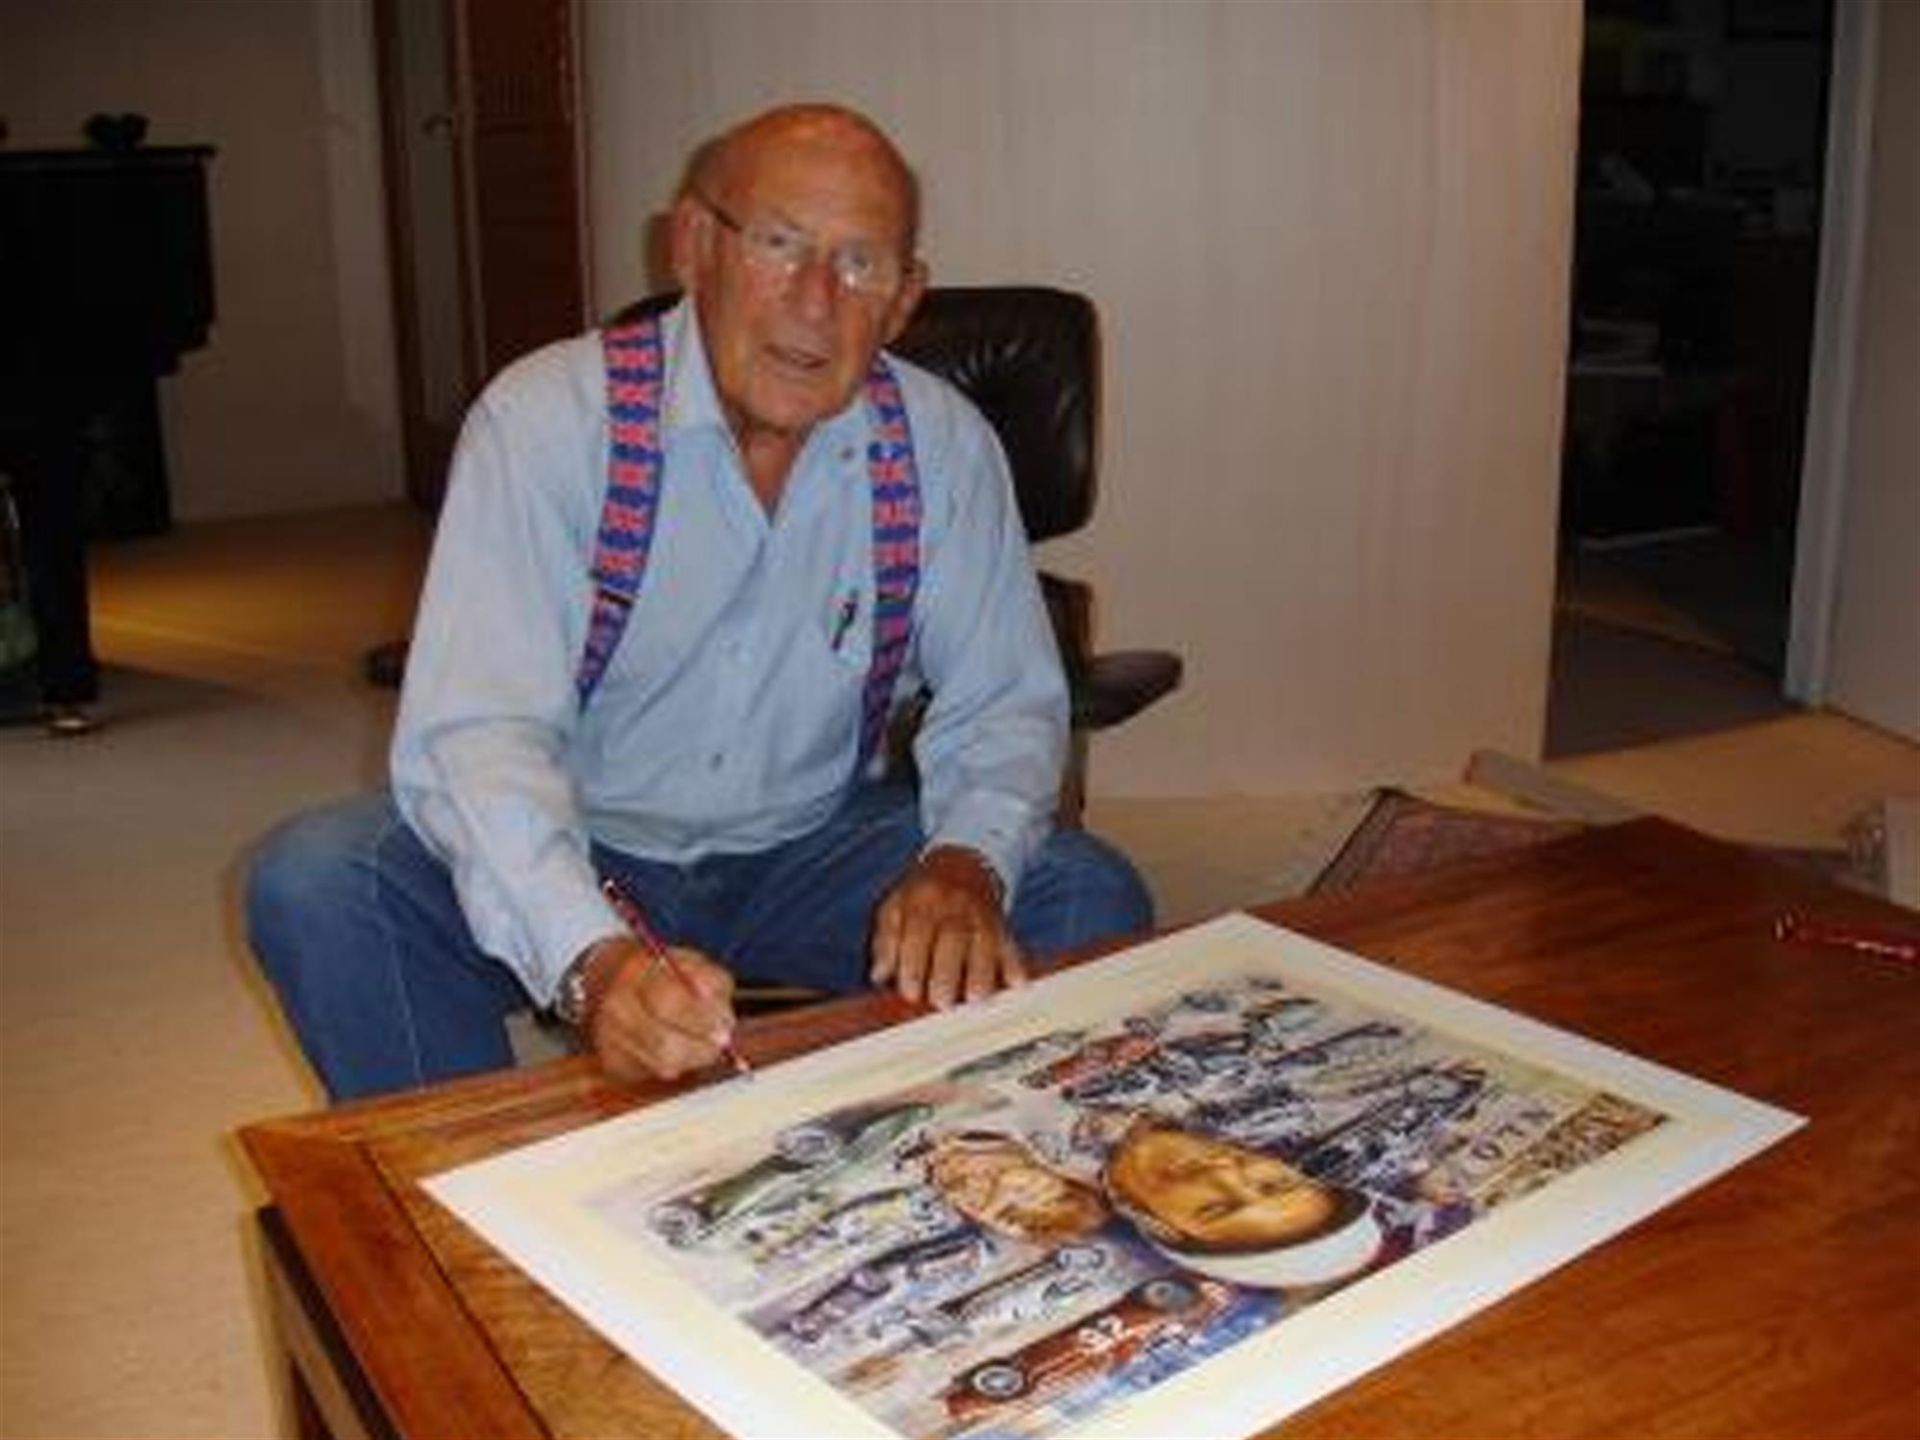 'Still Going Strong at 80' Sir Stirling Moss OBE - signed Original Artwork by Craig Warwick - Image 2 of 2